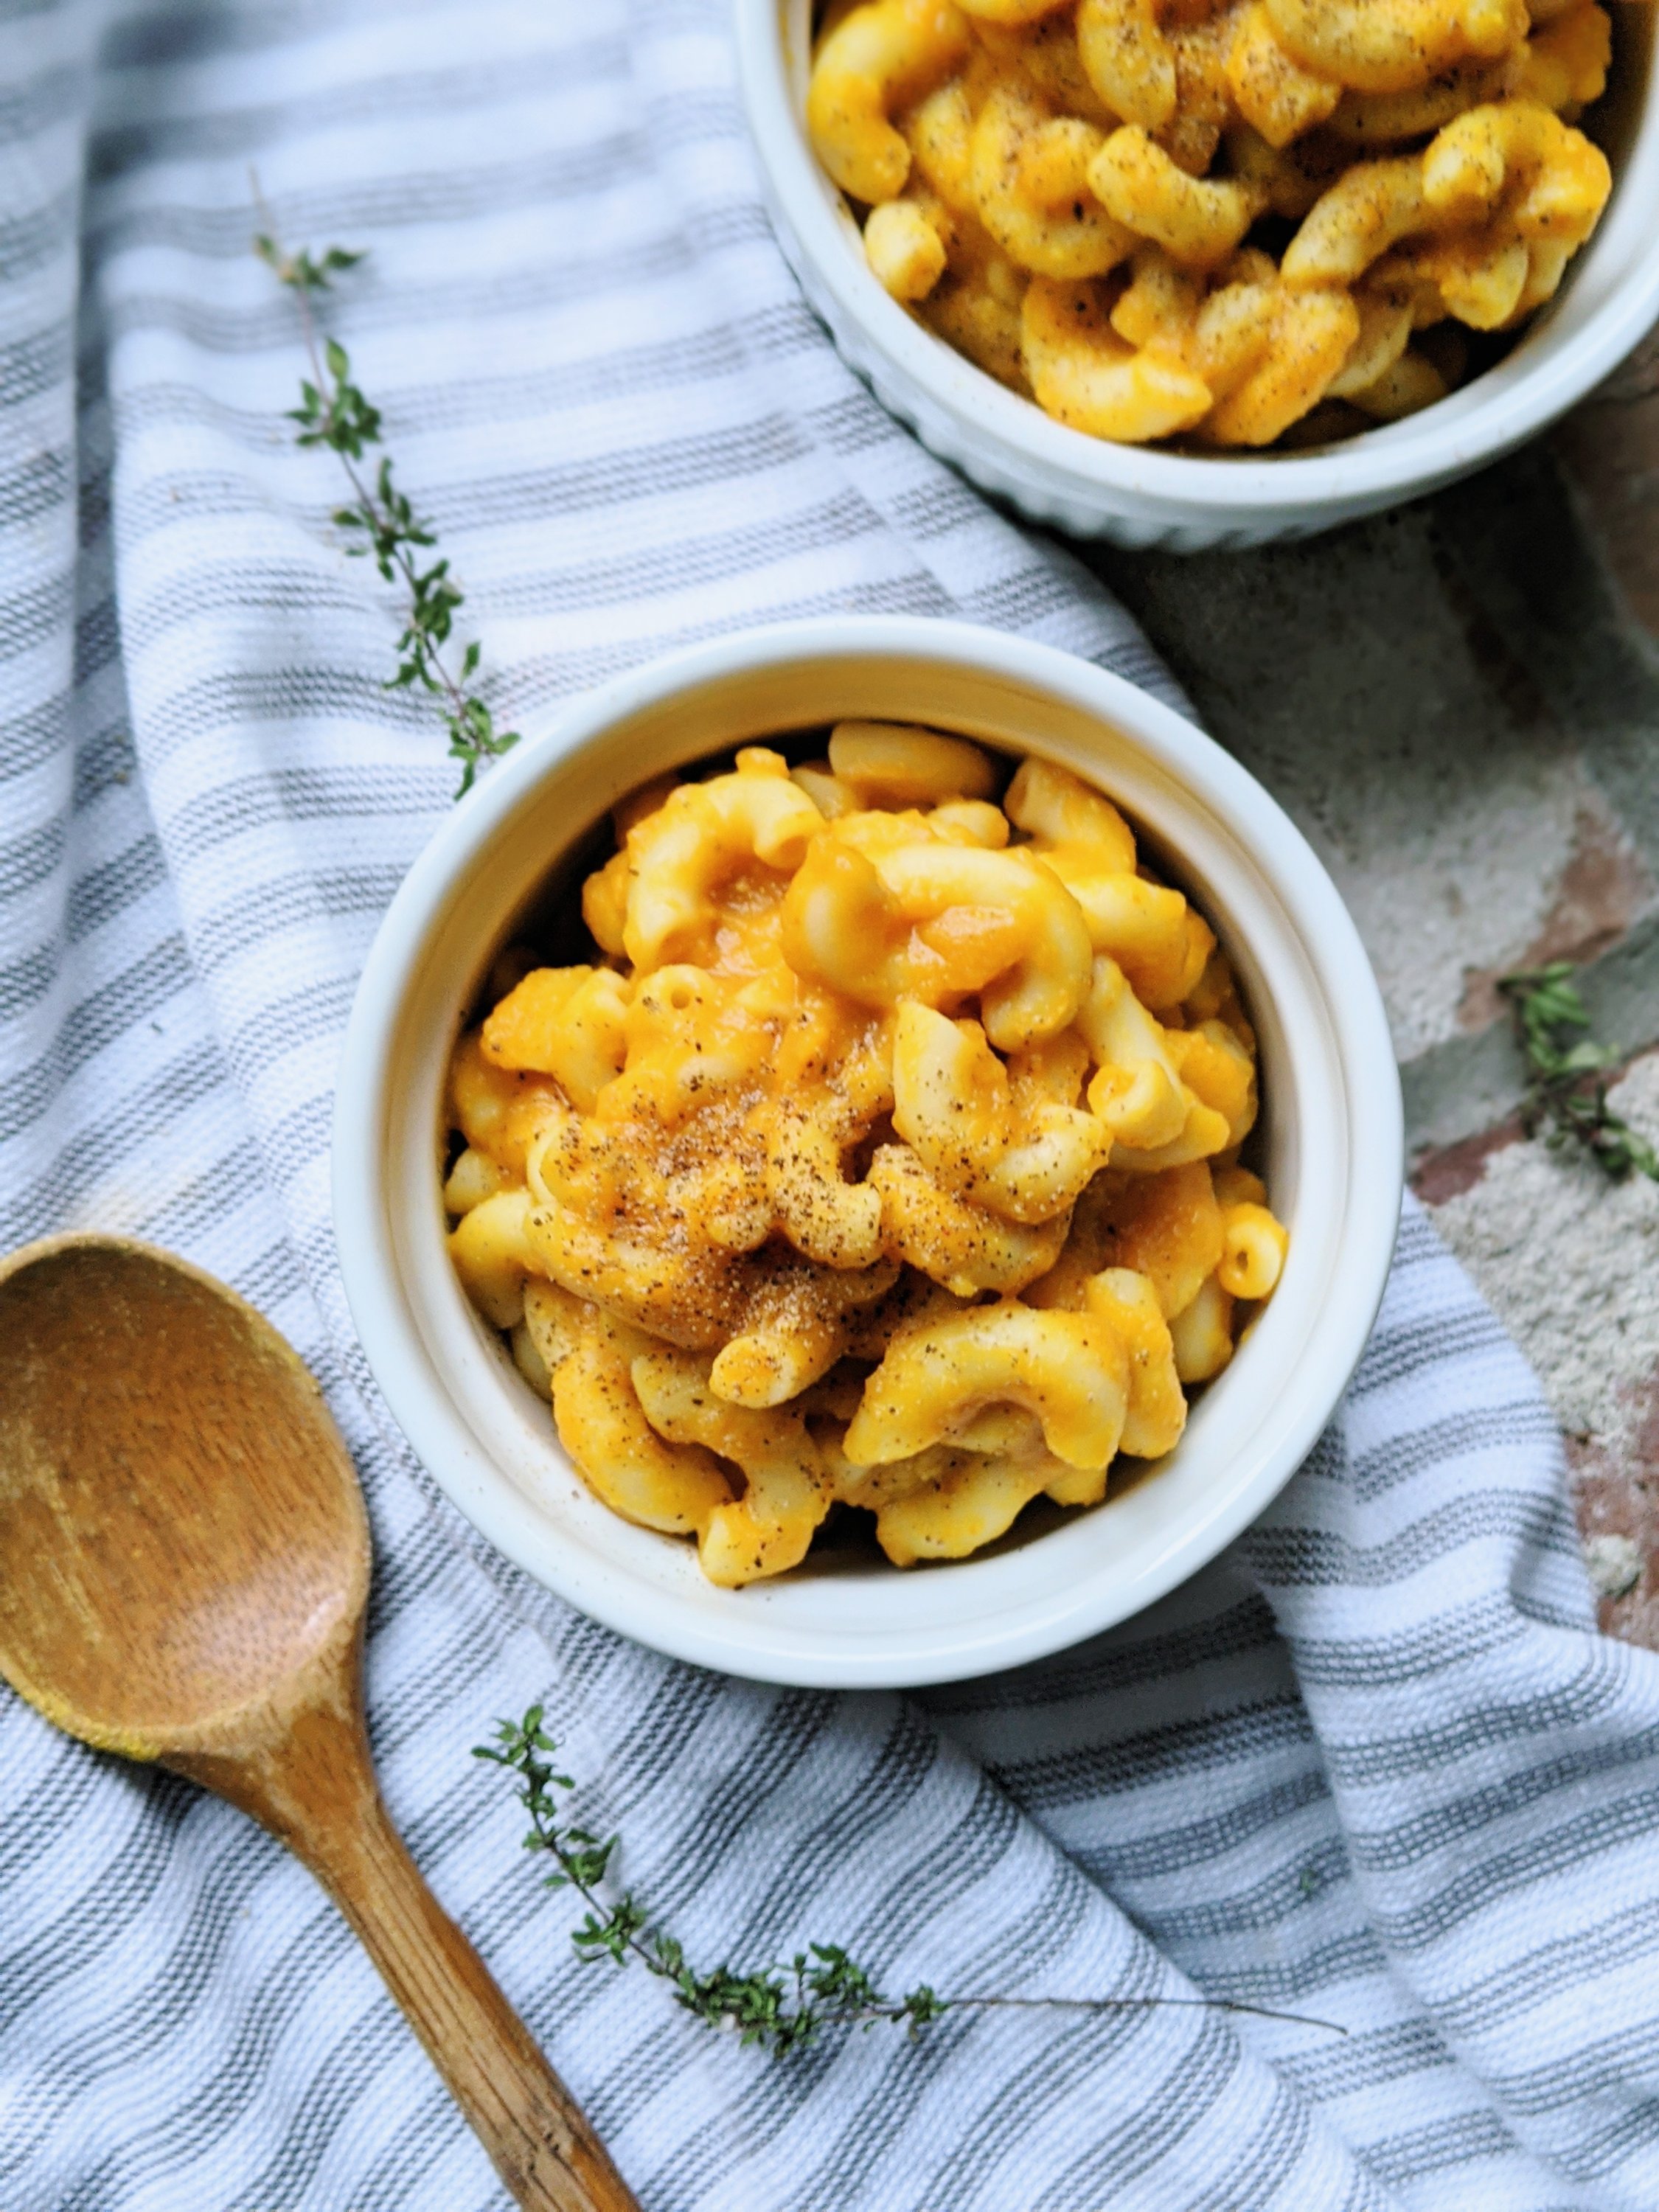 healthy mac and cheese recipes with vegetables pumpkin butternut squash healthy vegan gluten free baked macaroni one pot make ahead dinners for family weeknight meals suppers